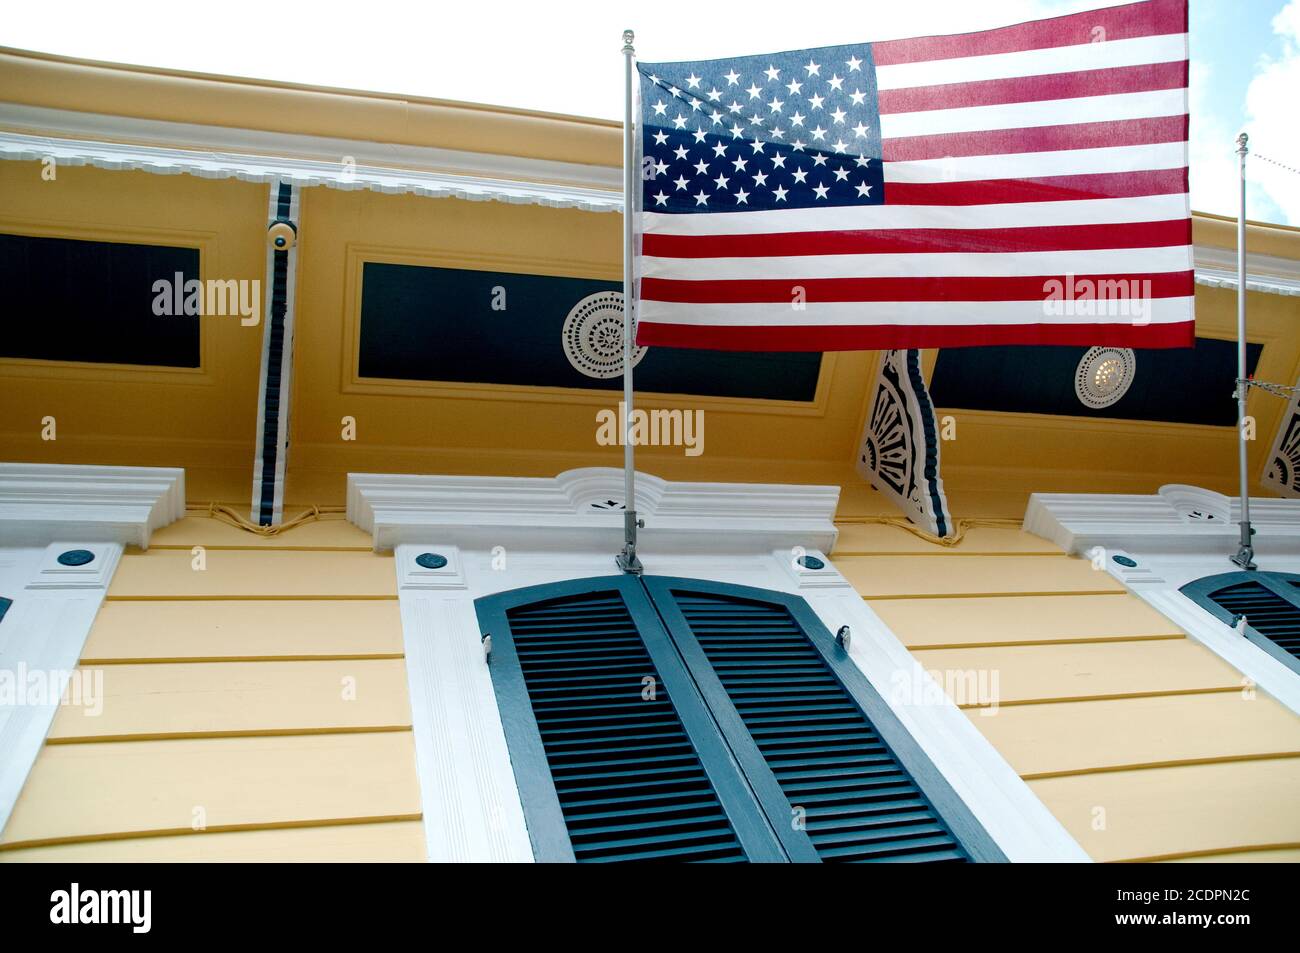 An American flag, the stars and stripes, hanging over the shuttered window of a yellow shotgun house, French Quarter, New Orleans, Louisiana, USA. Stock Photo